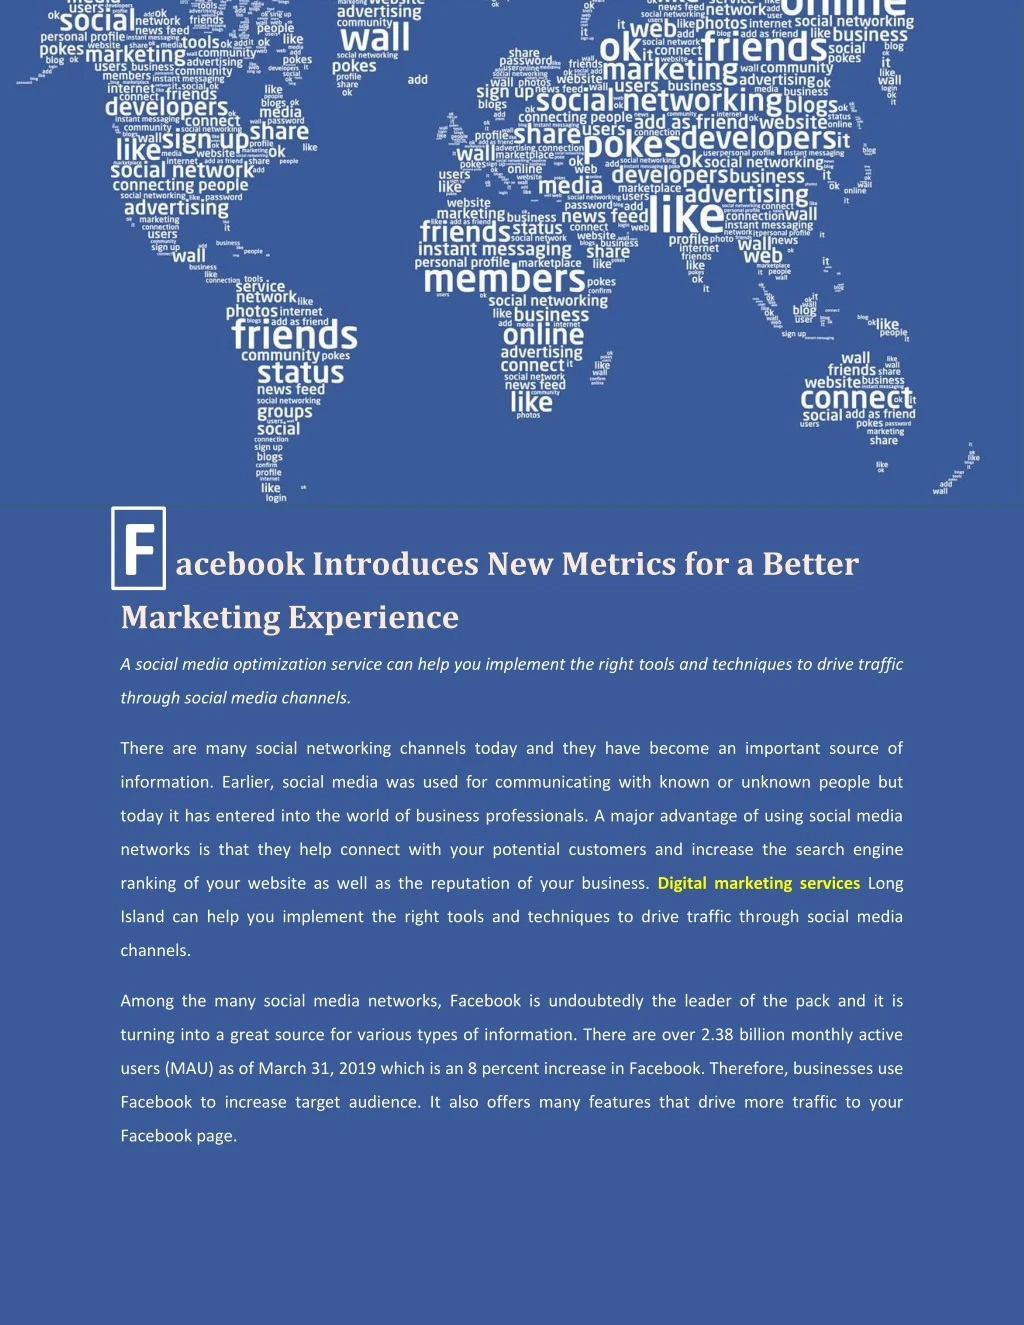 f acebook introduces new metrics for a better